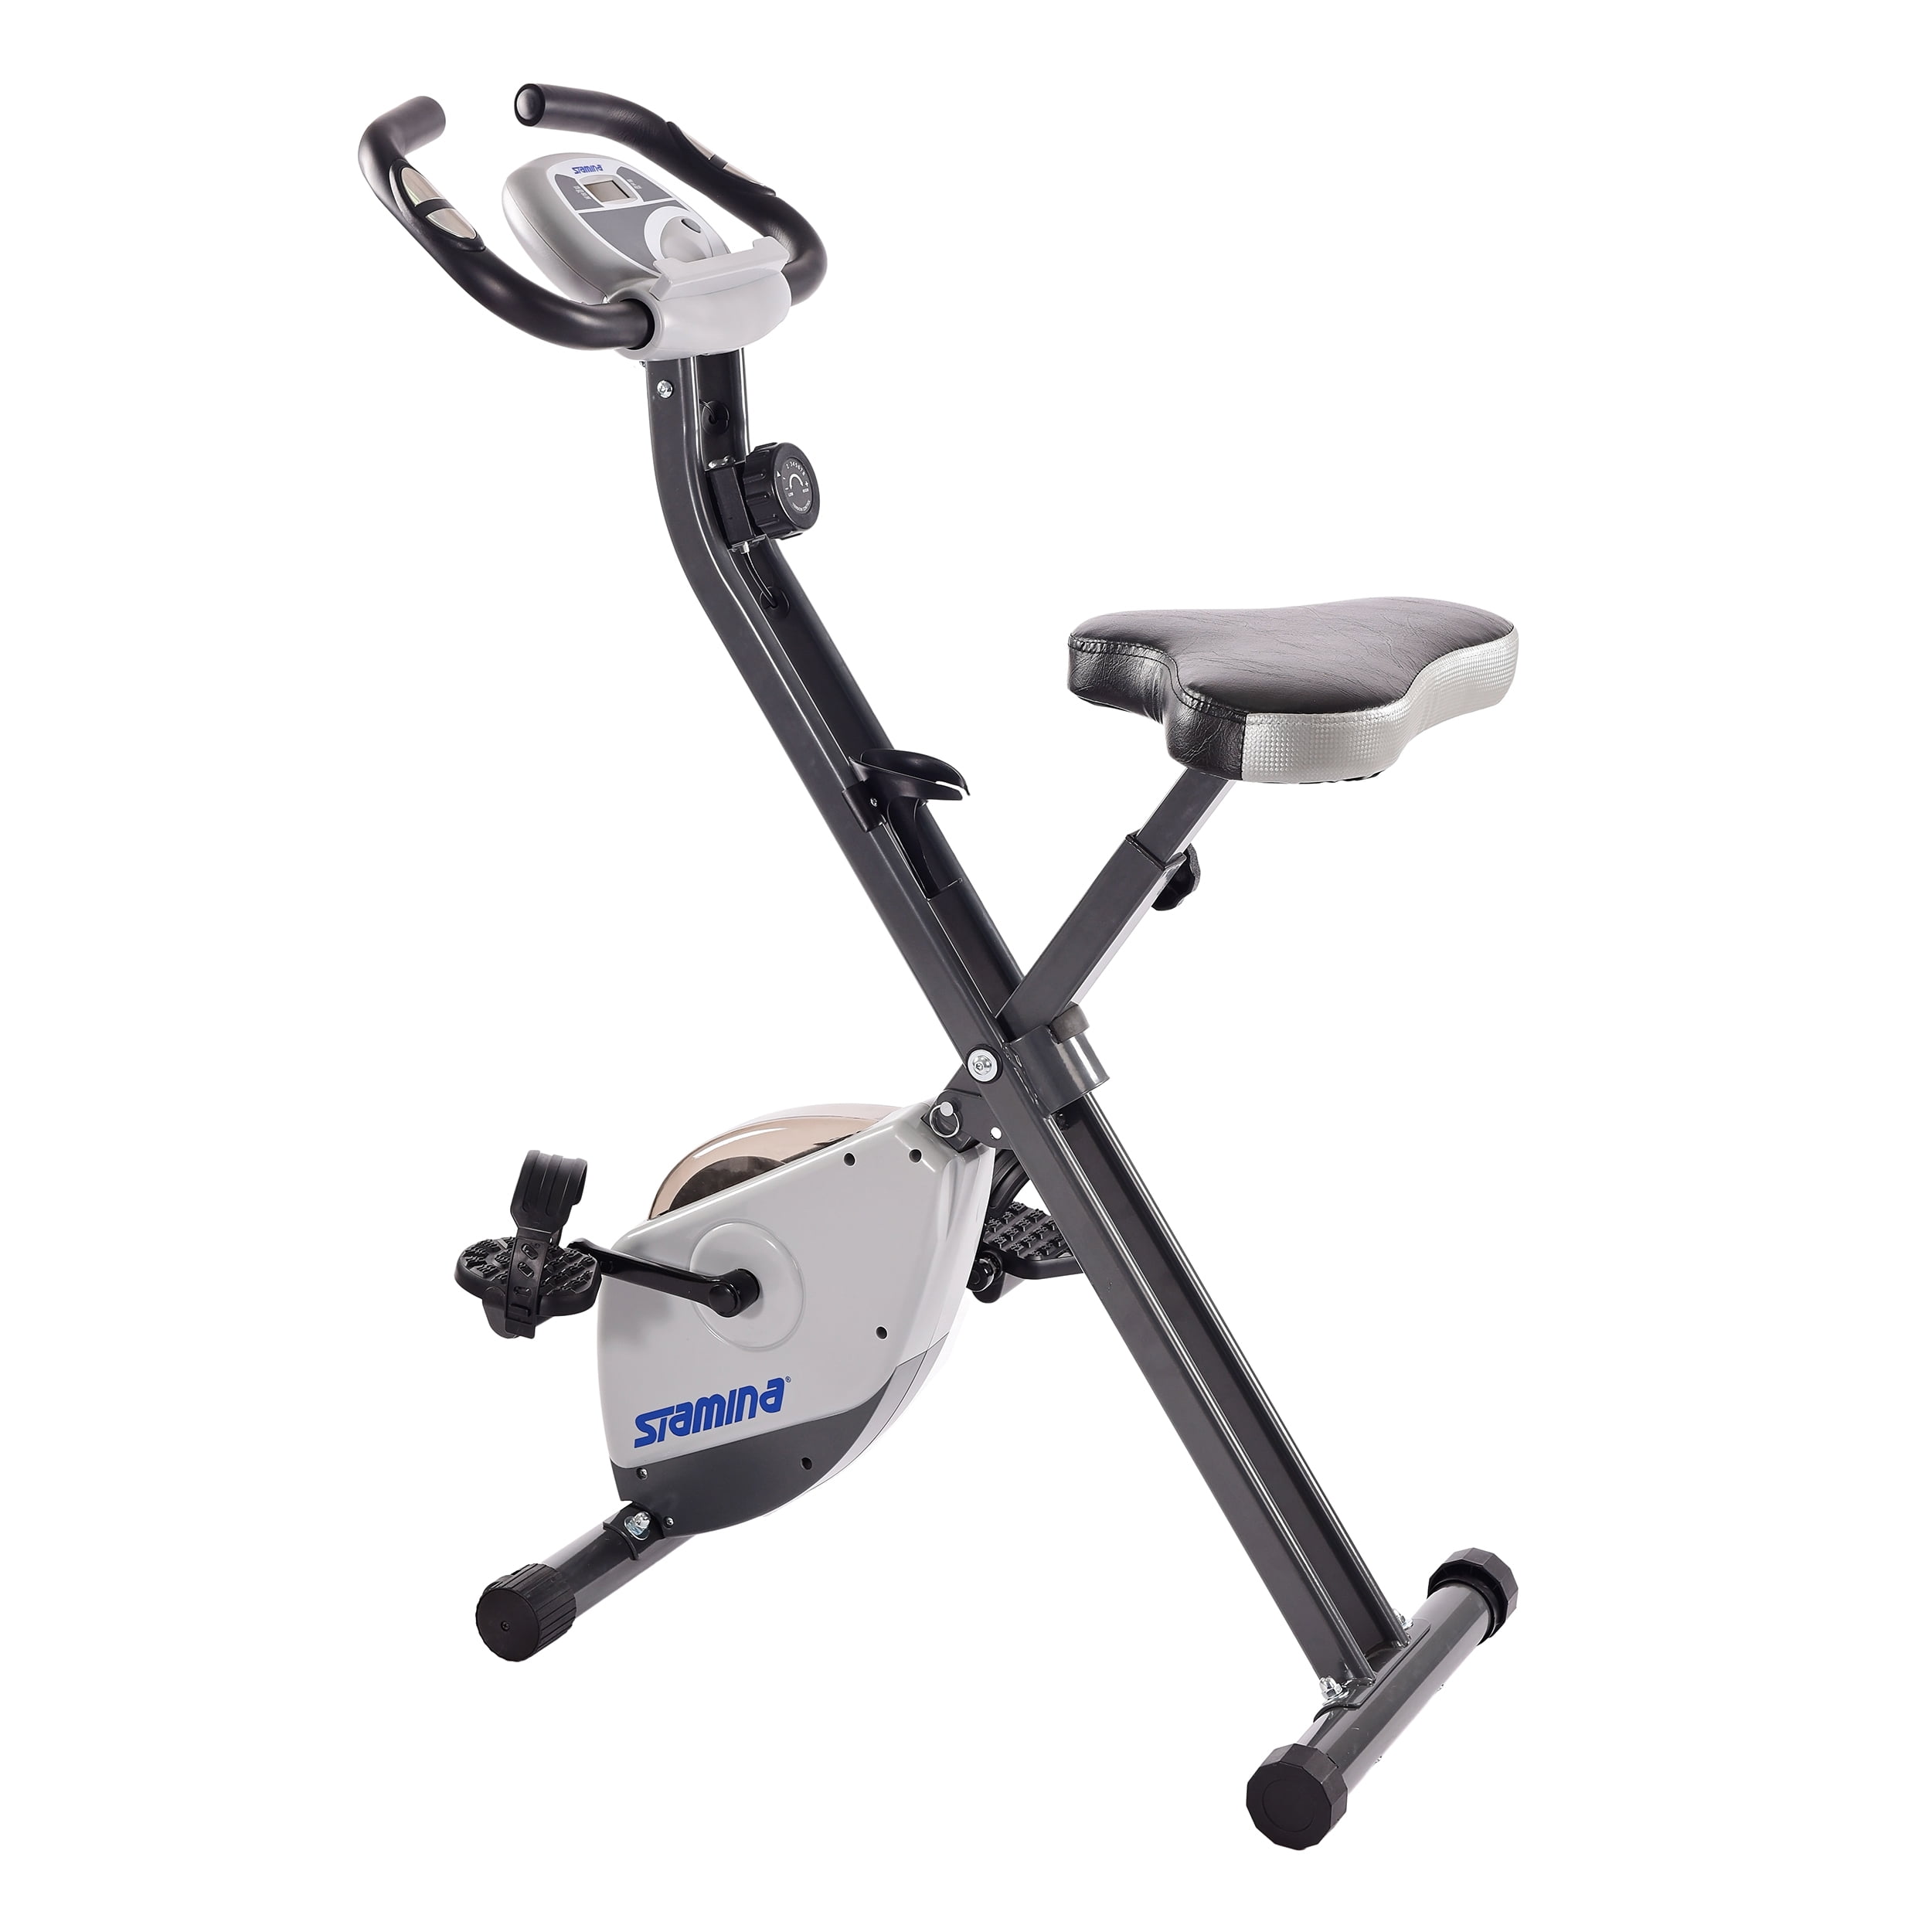 Details about   ✨Trainer Exercise Stationary Bike Bicycle Cycling Fitness Cardio Workout Indoor 